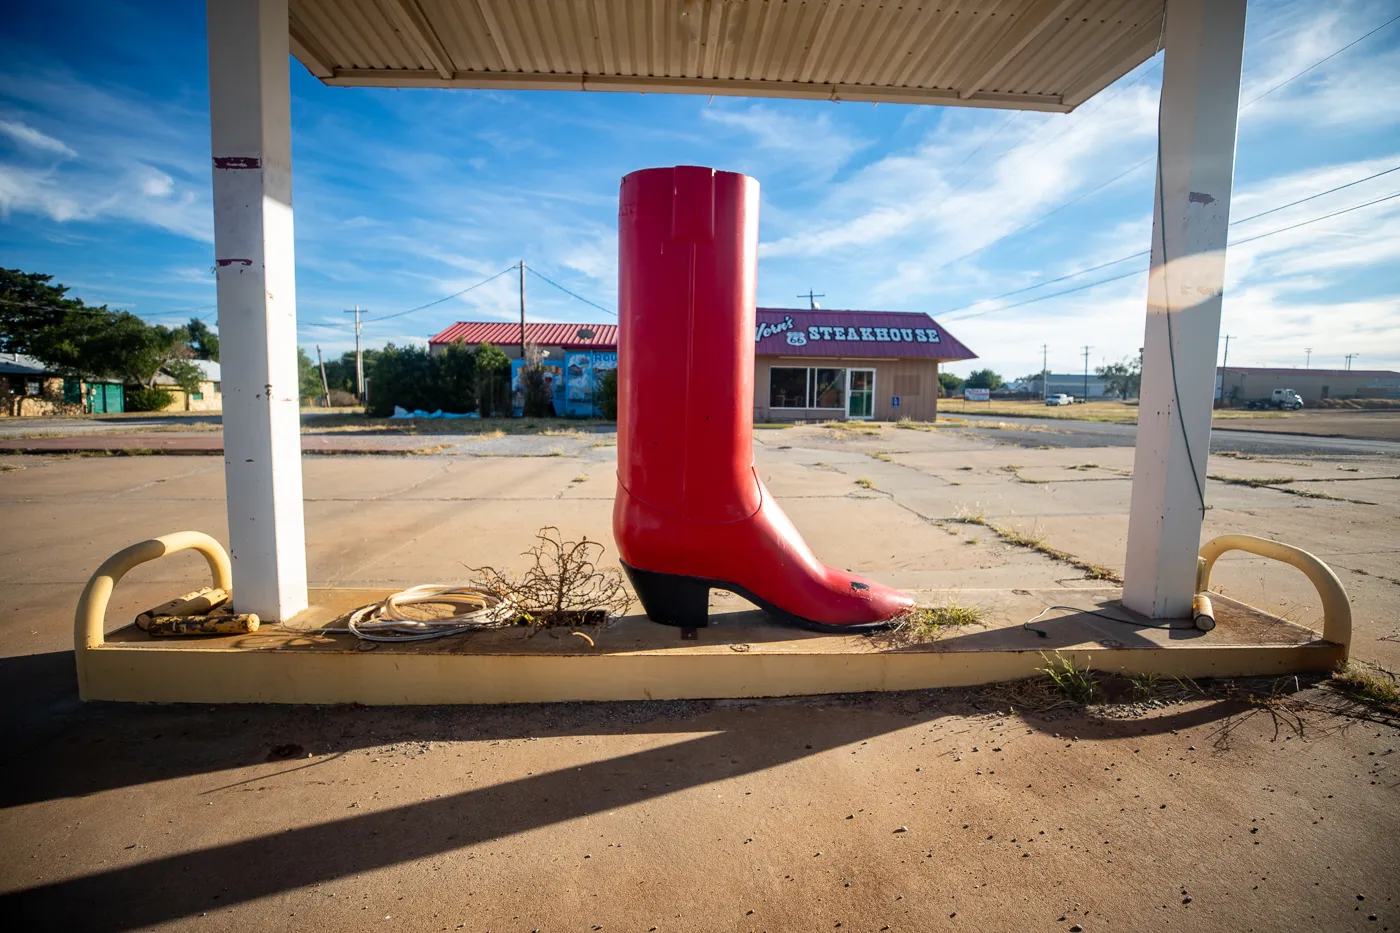 Big Red Cowboy Boot at Big Vern’s Steakhouse in Shamrock, Texas Route 66 roadside attraction